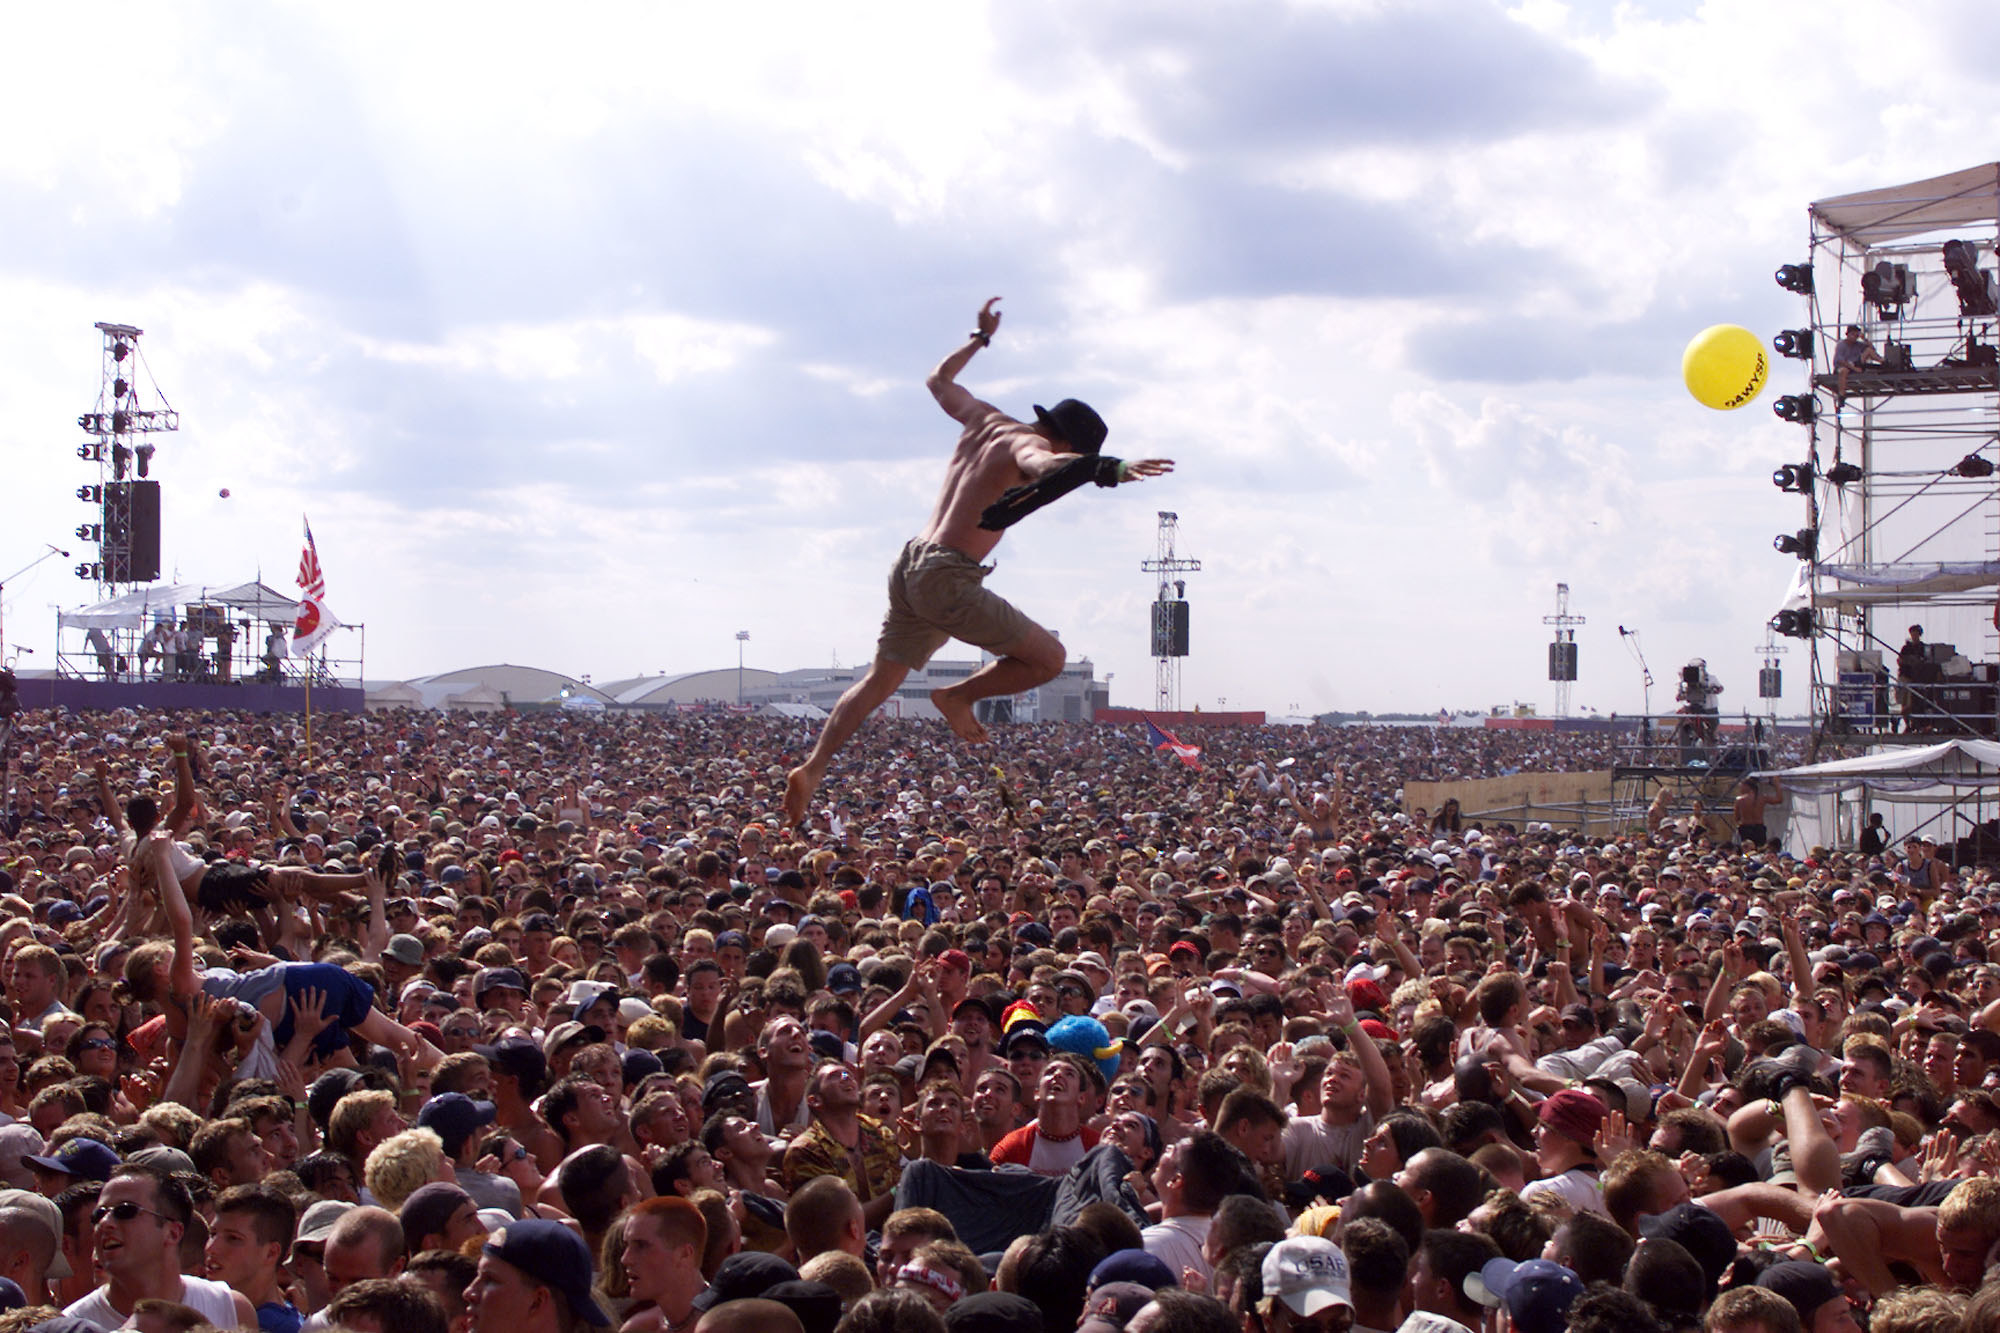 a person jumping in the large crowd